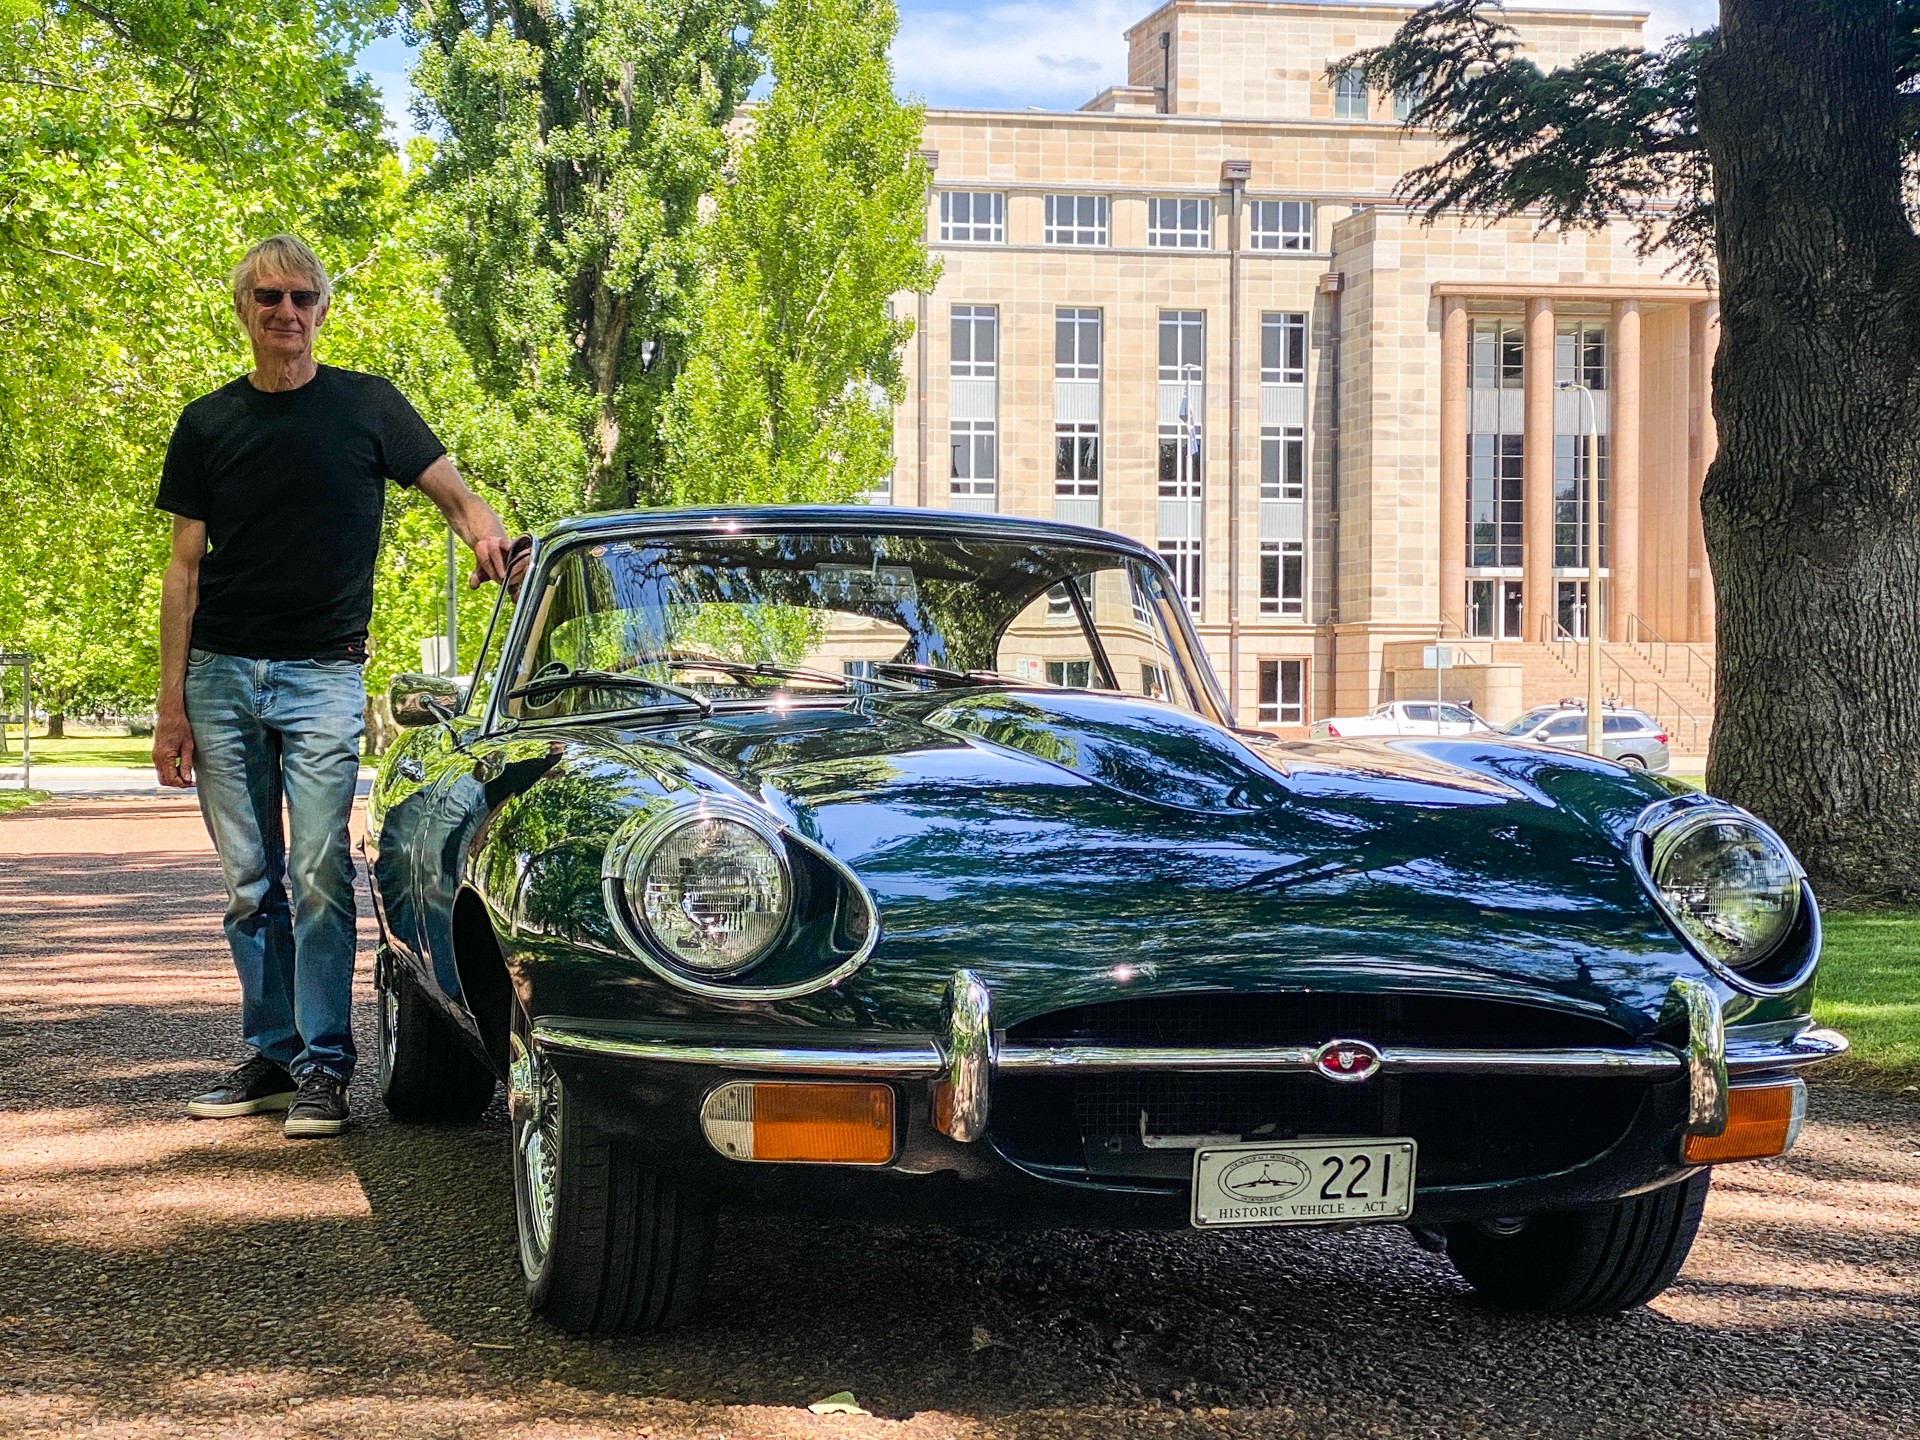 Putting the 'E' into Terribly British Day: Queanbeyan car show to celebrate 60 years of the Jaguar E-Type